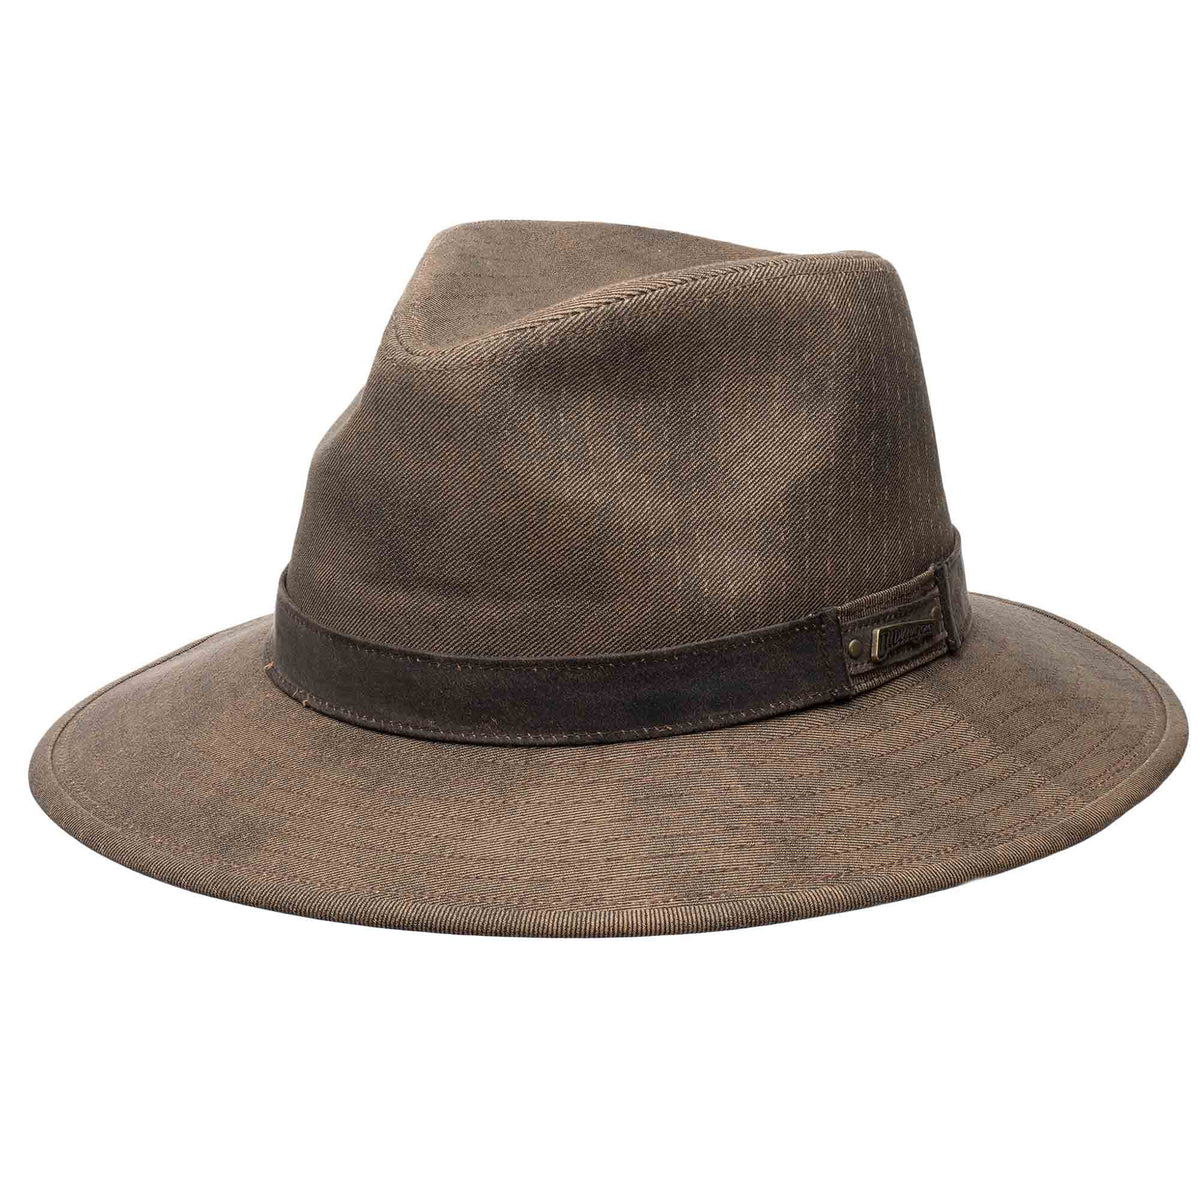 Indiana Jones Officially Licensed Weathered Cotton Blend Outback Hat: Size: S/M Dark Brown